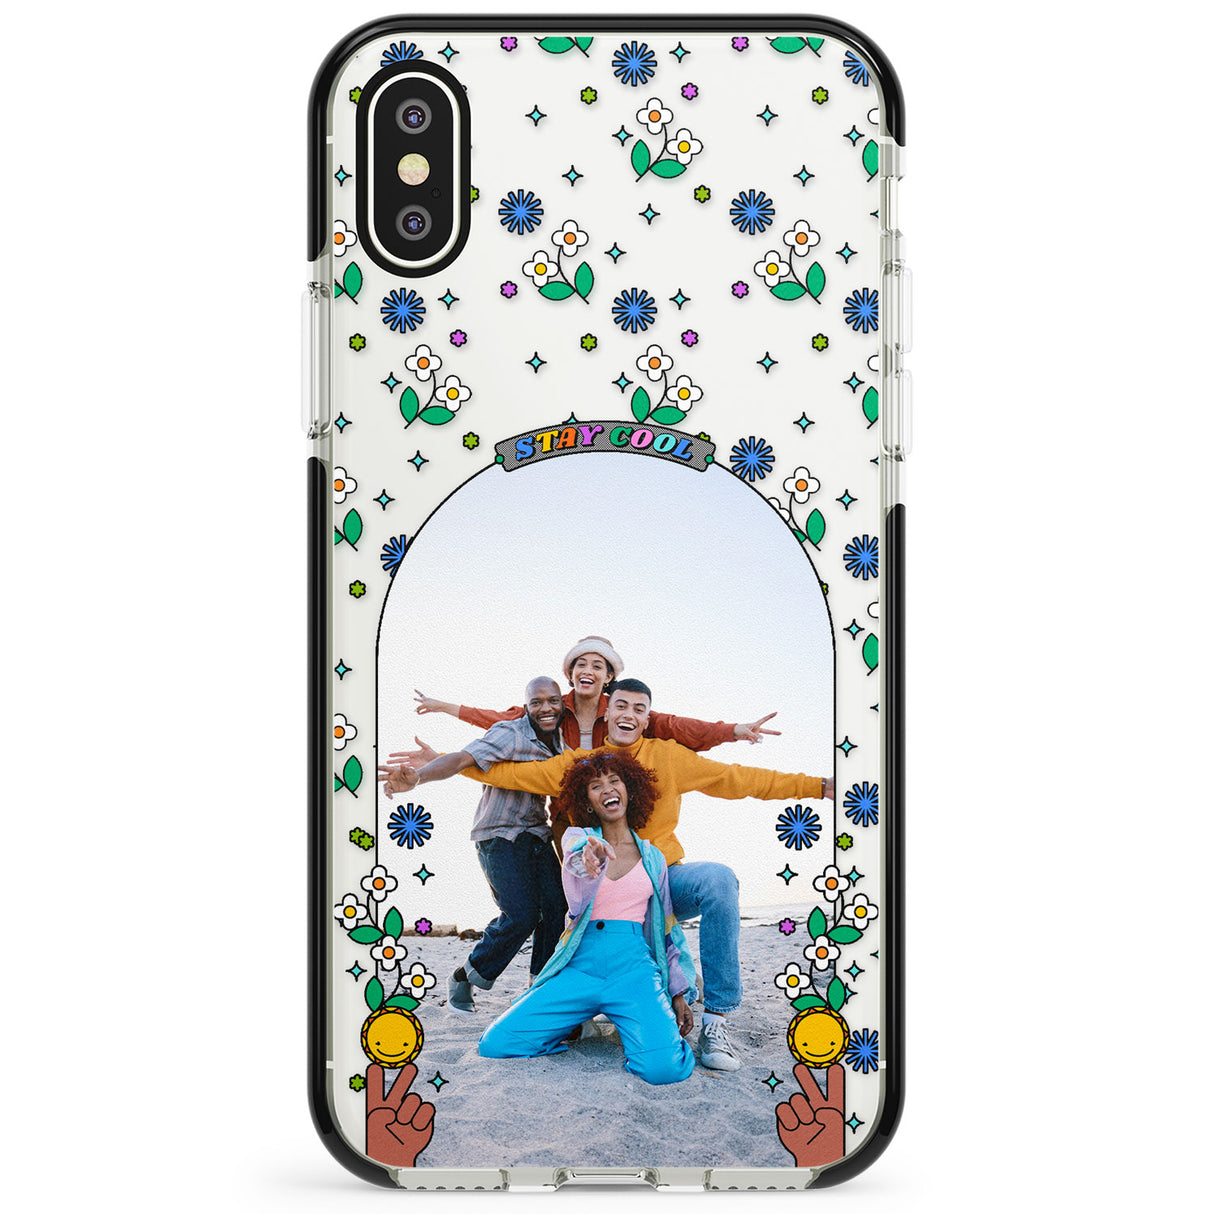 Personalised Summer Photo Frame Phone Case for iPhone X XS Max XR